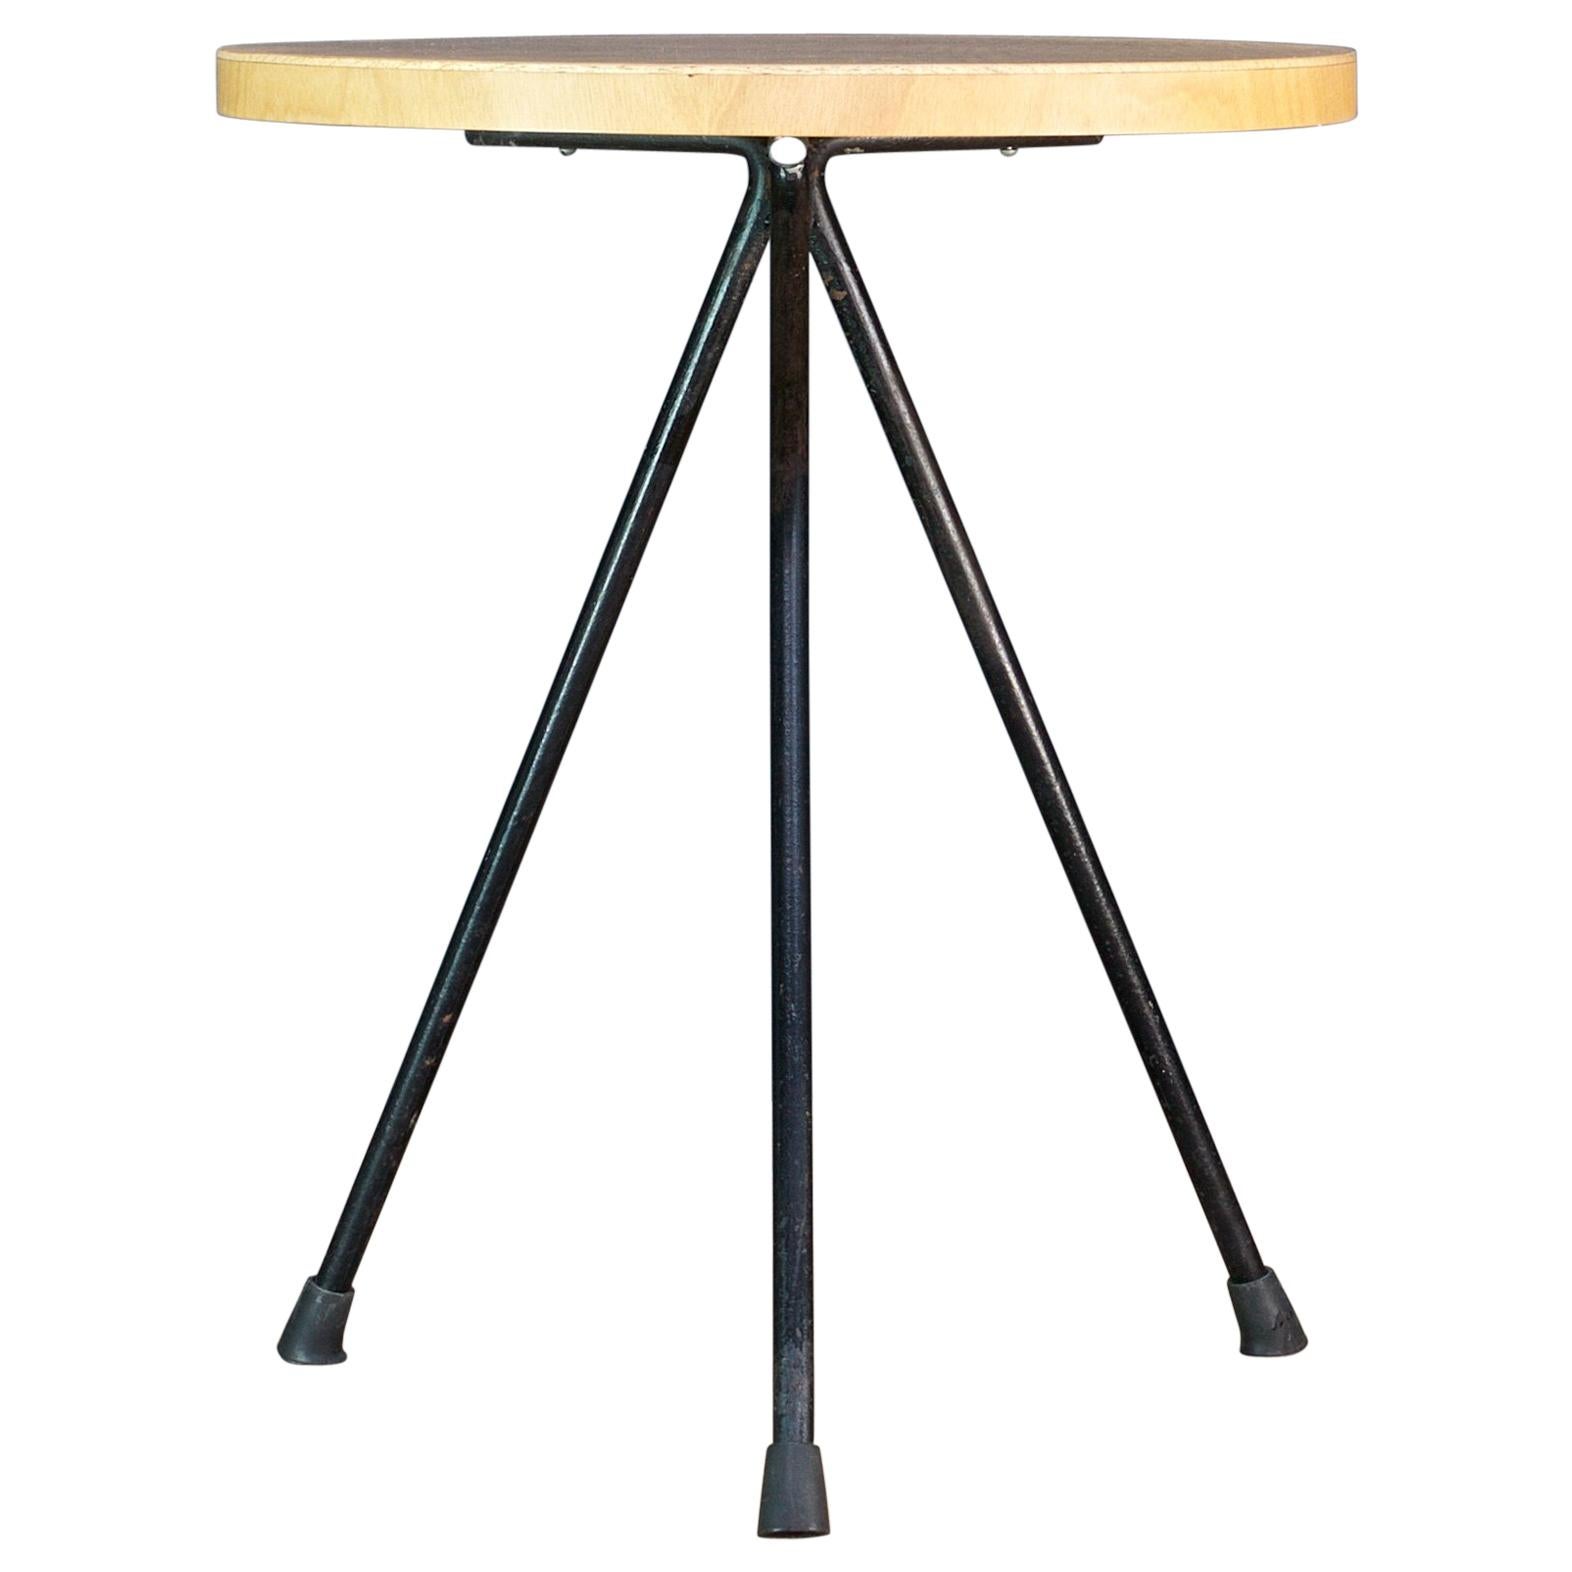 Table by Norman Cherner for Konwiser MOMA Exhibit Good Design Mid-Century Modern